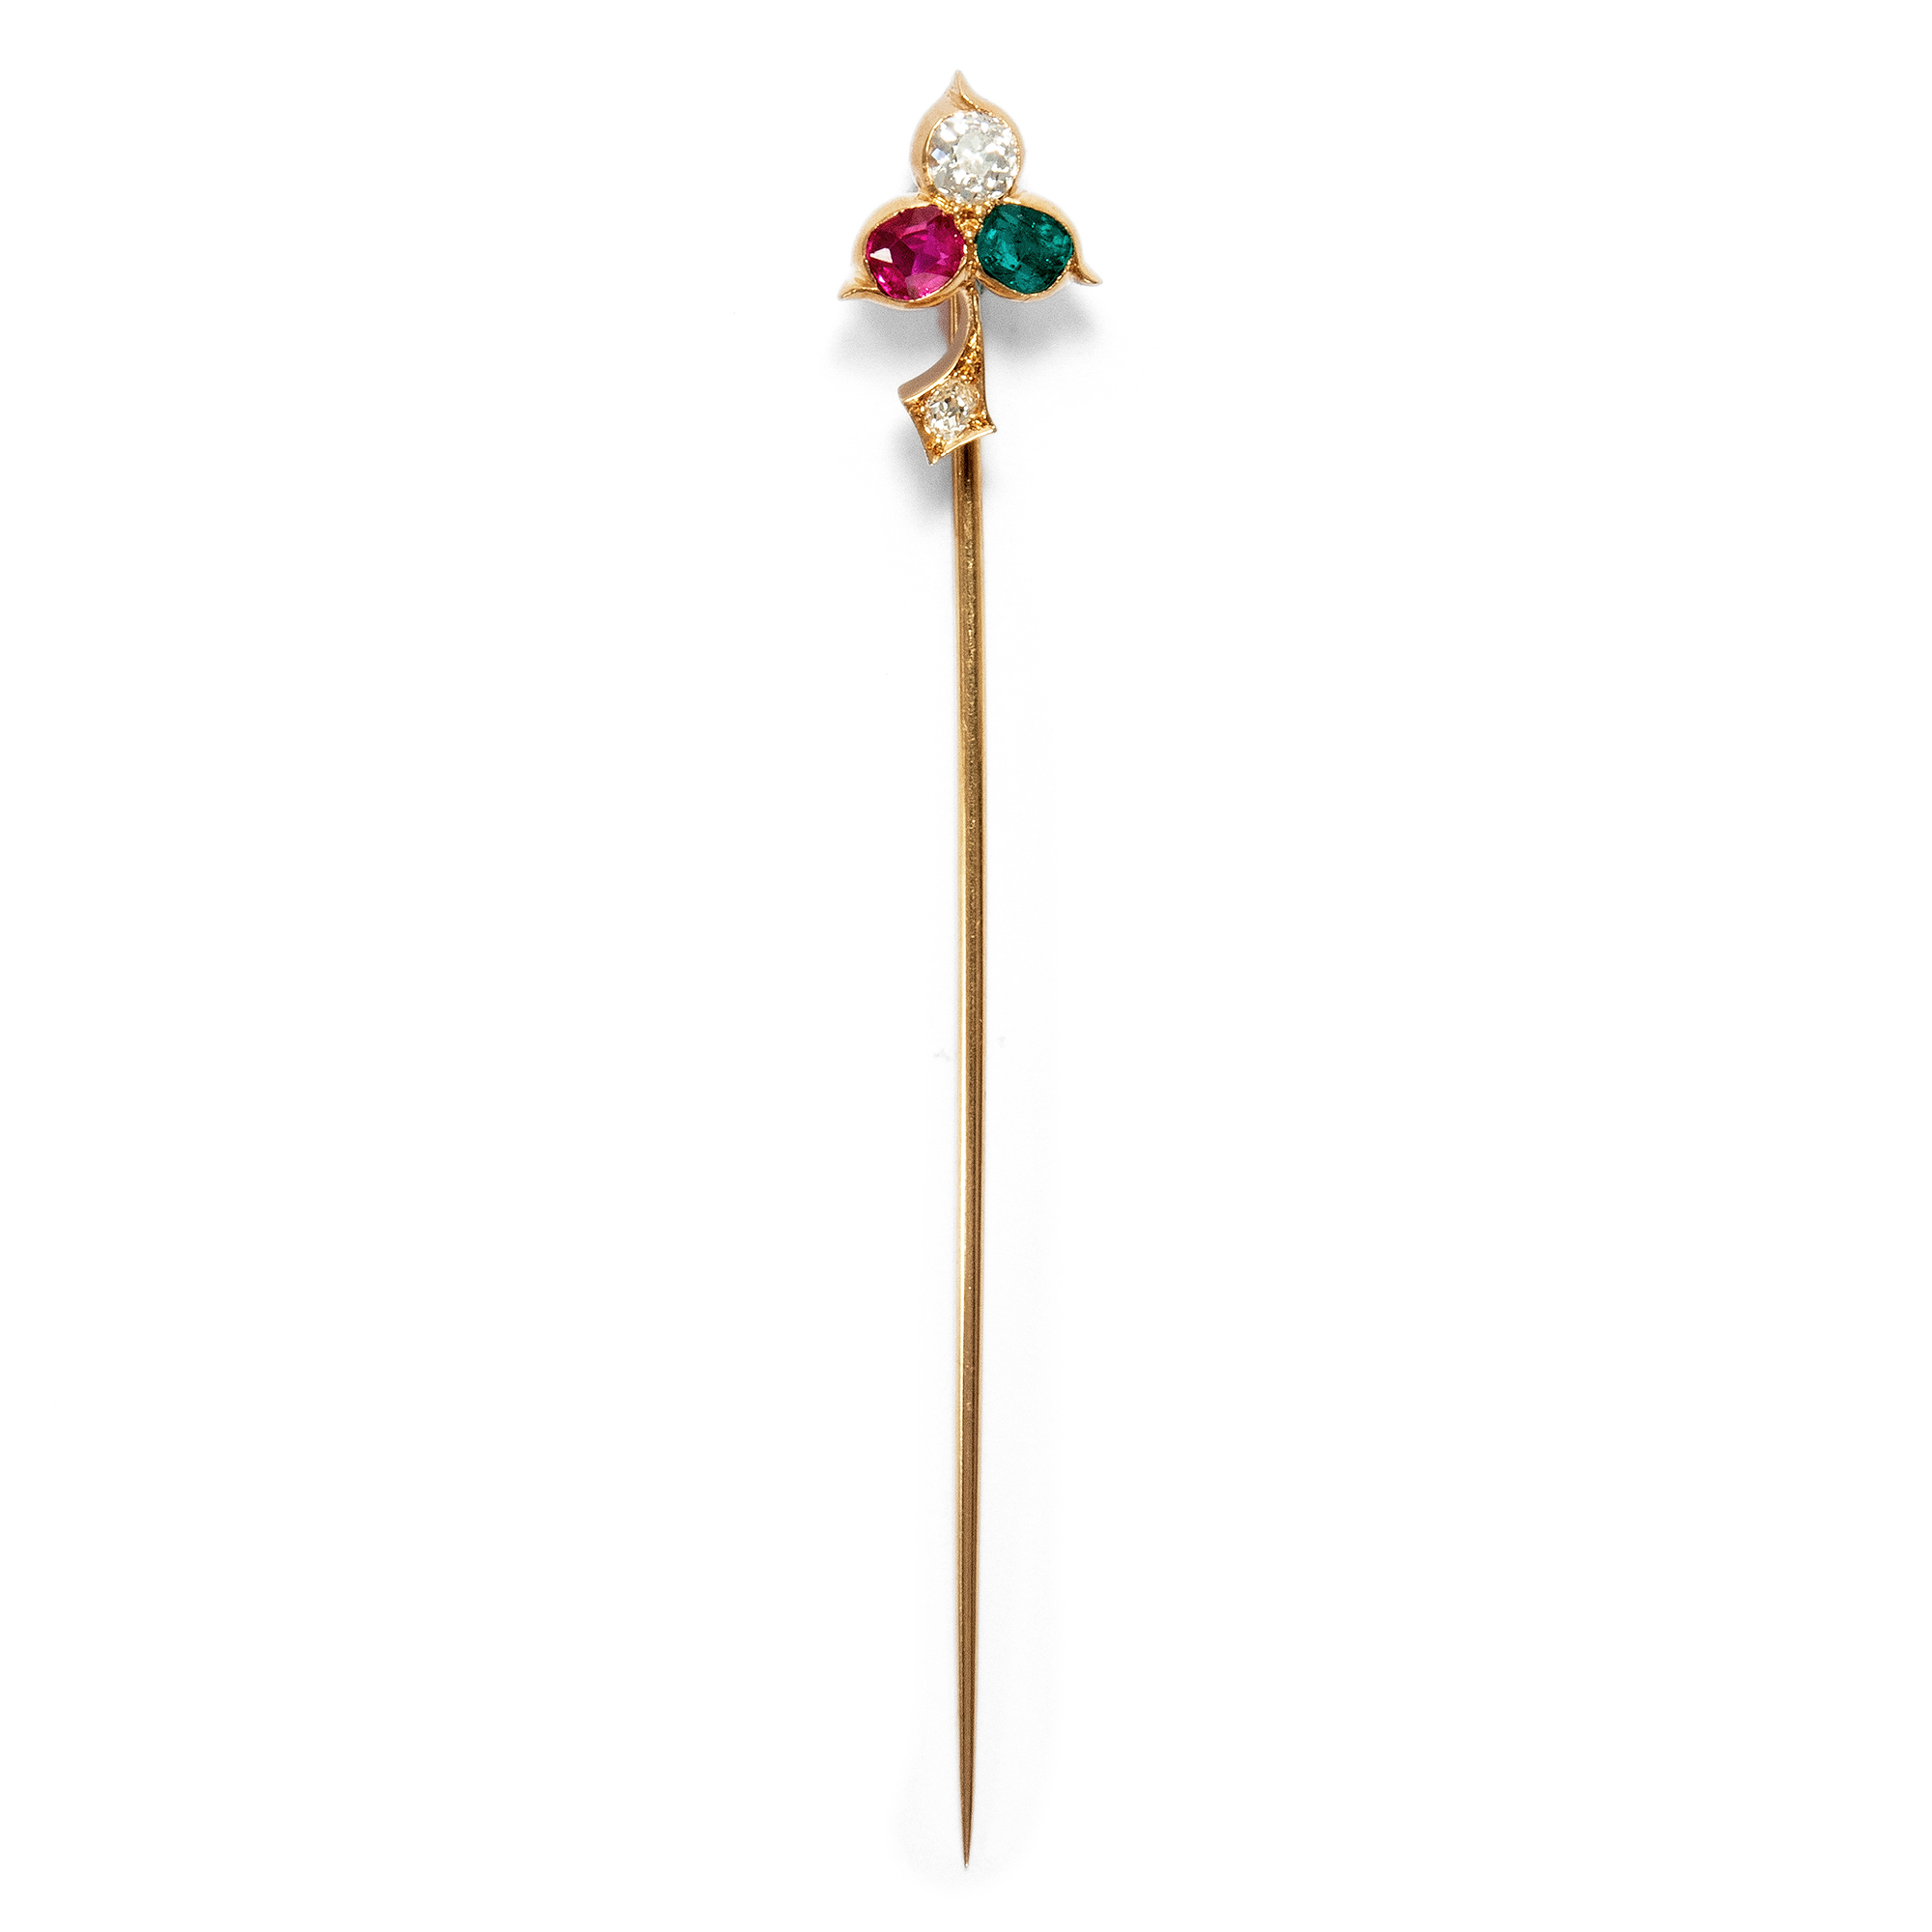 Antique Needle With Ruby From Burma, Emerald From Colombia & Diamonds, Circa 1900